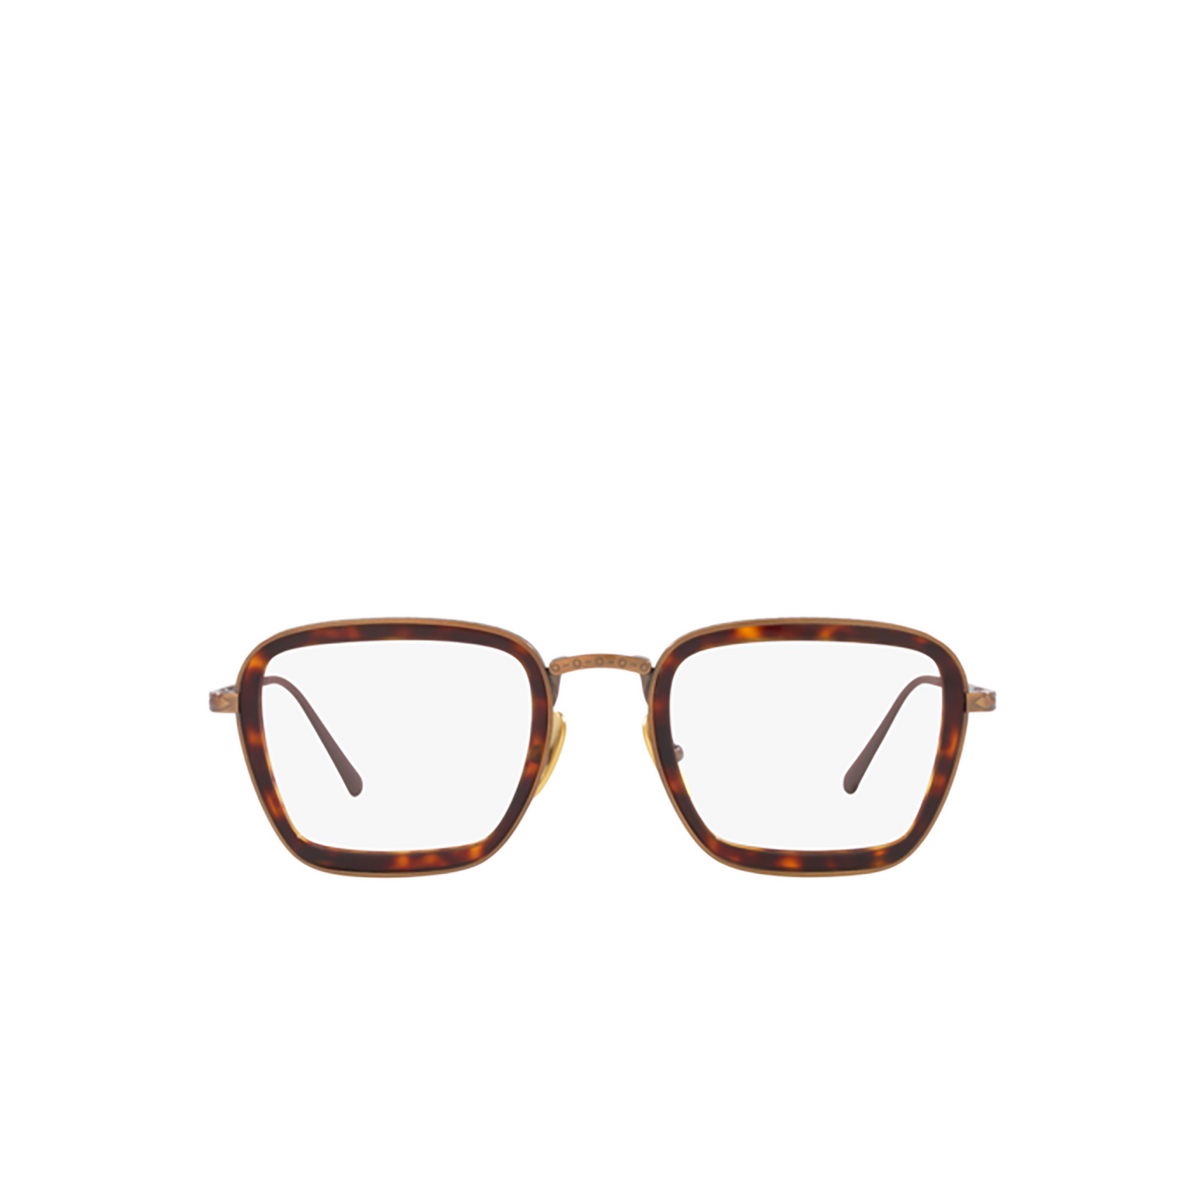 Persol PO5013VT Eyeglasses 8016 Brown - front view